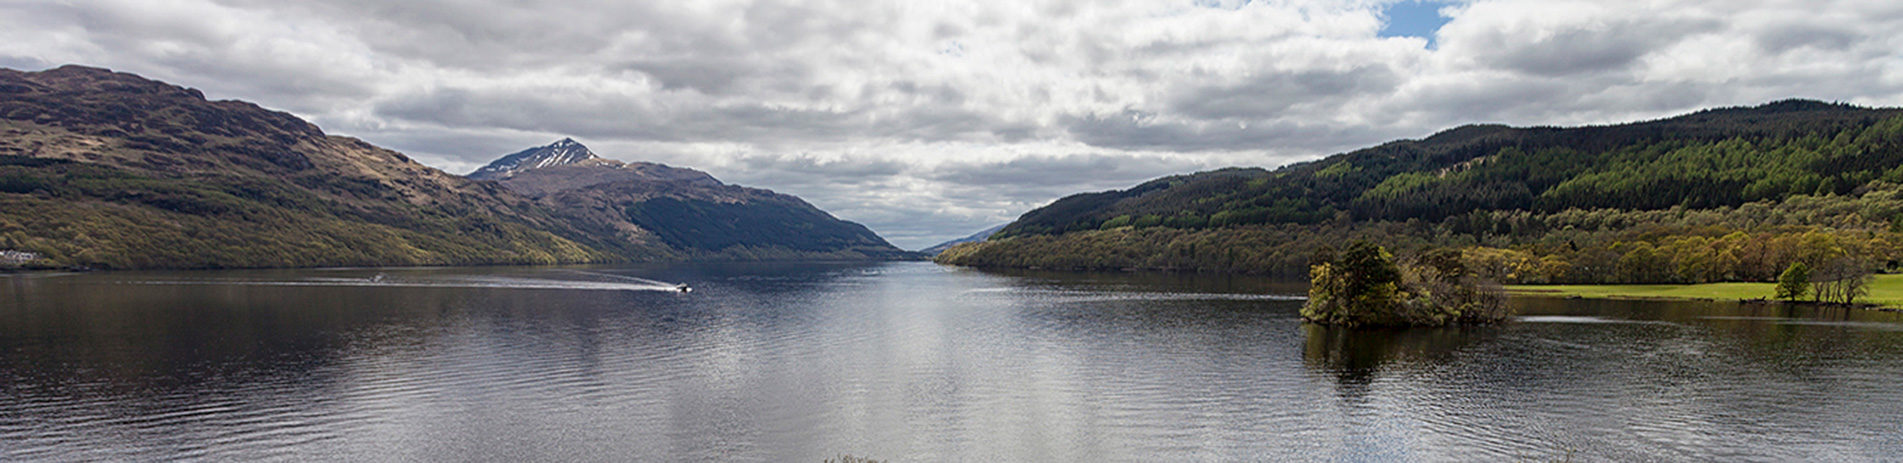 landscape-of-loch-lomond-wooded-shores-with-ben-lomond-prominent-in-the-distance-on-the-left